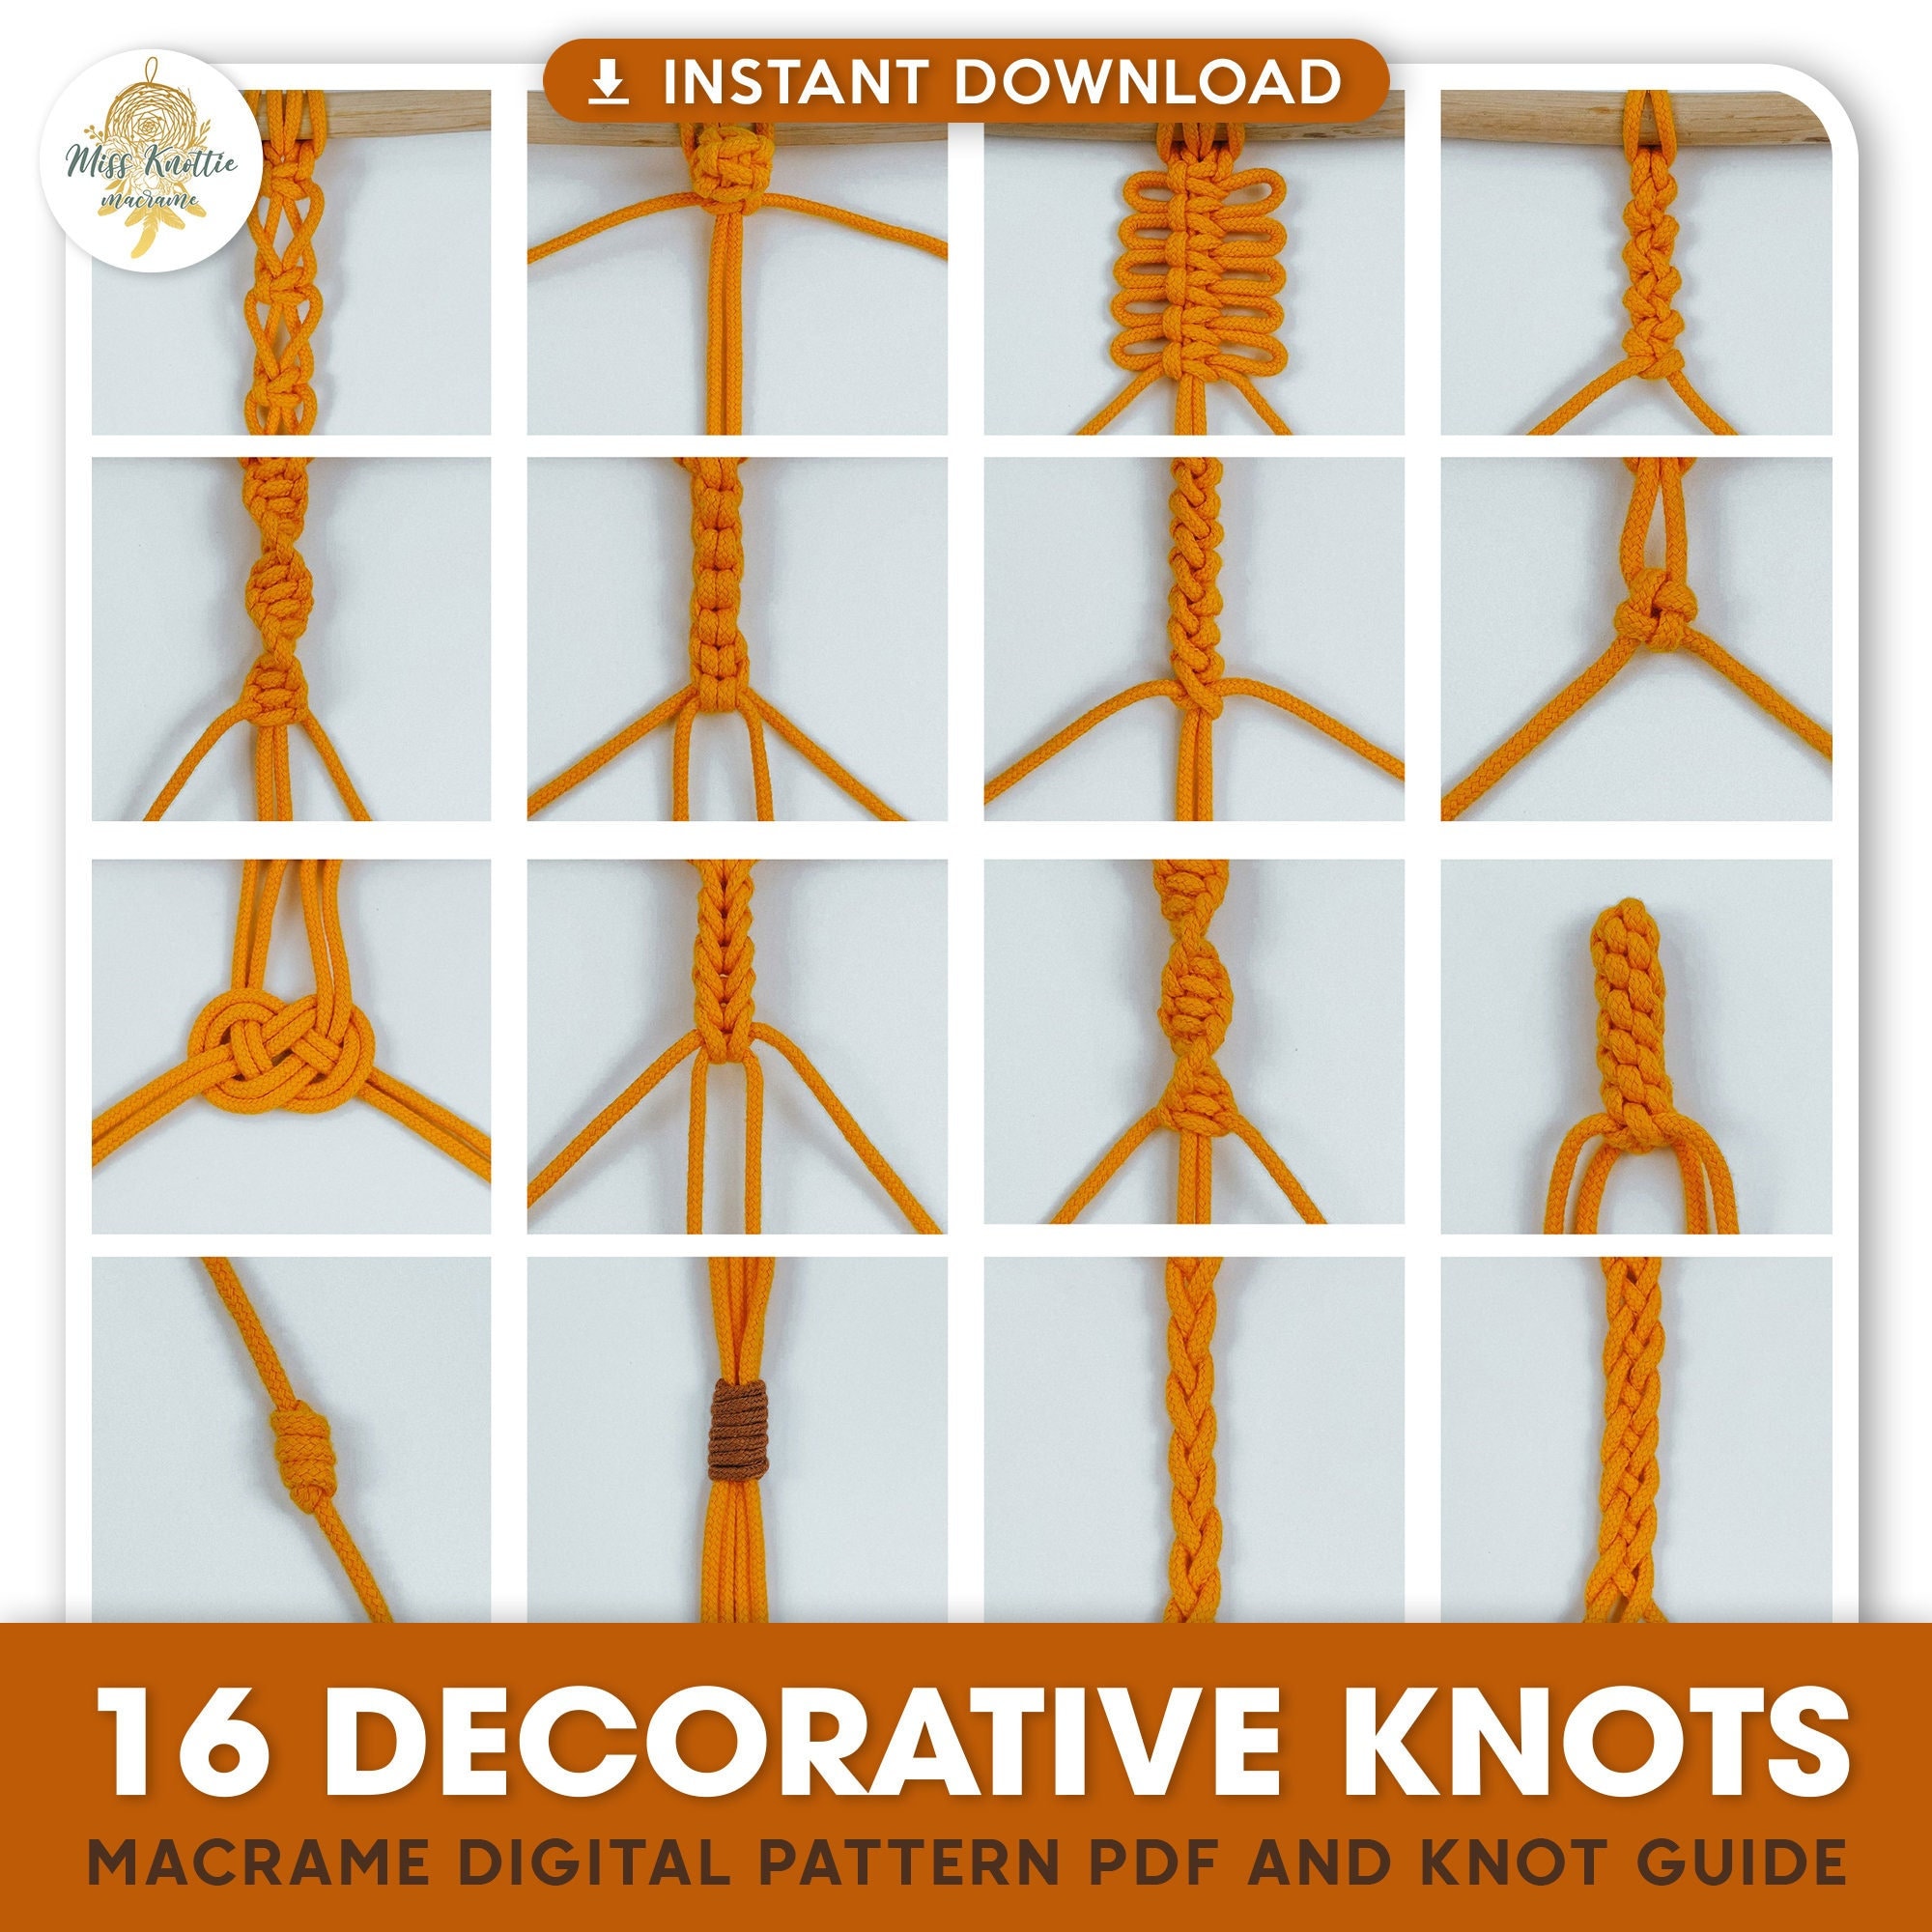 Buy Macrame Decorative Knot Guide PDF With 16 Knots Explained